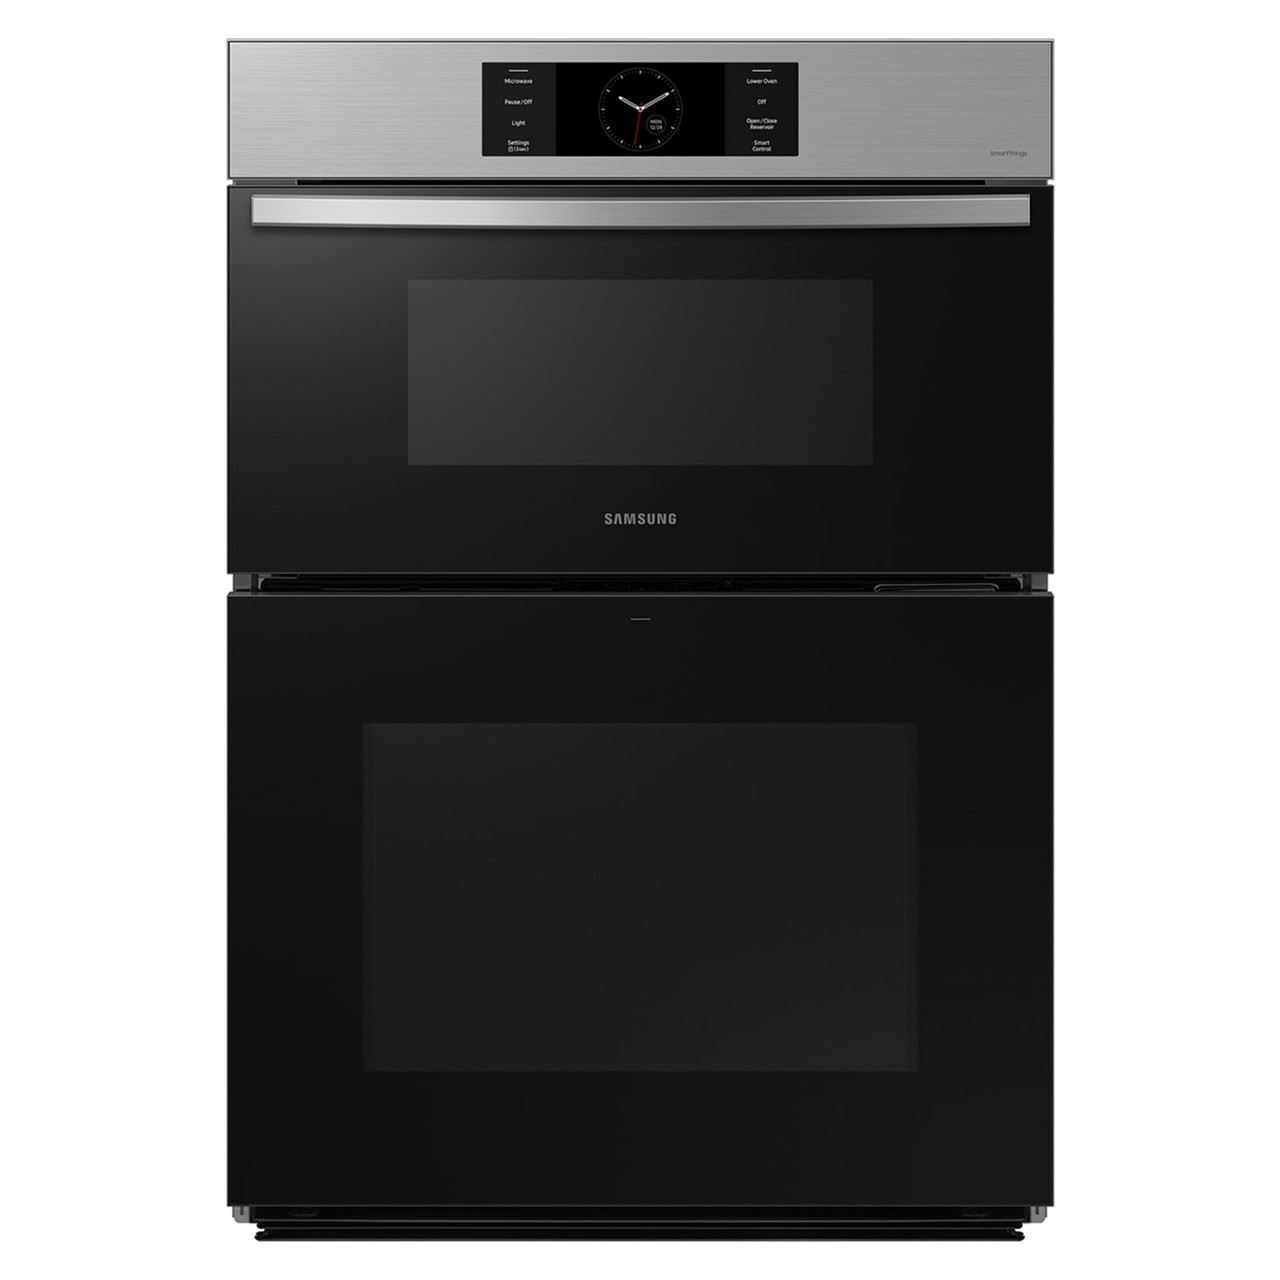 Samsung Bespoke 30” Microwave Combination Wall Oven with Flex Duo Stainless Steel - NQ70CG700DSR